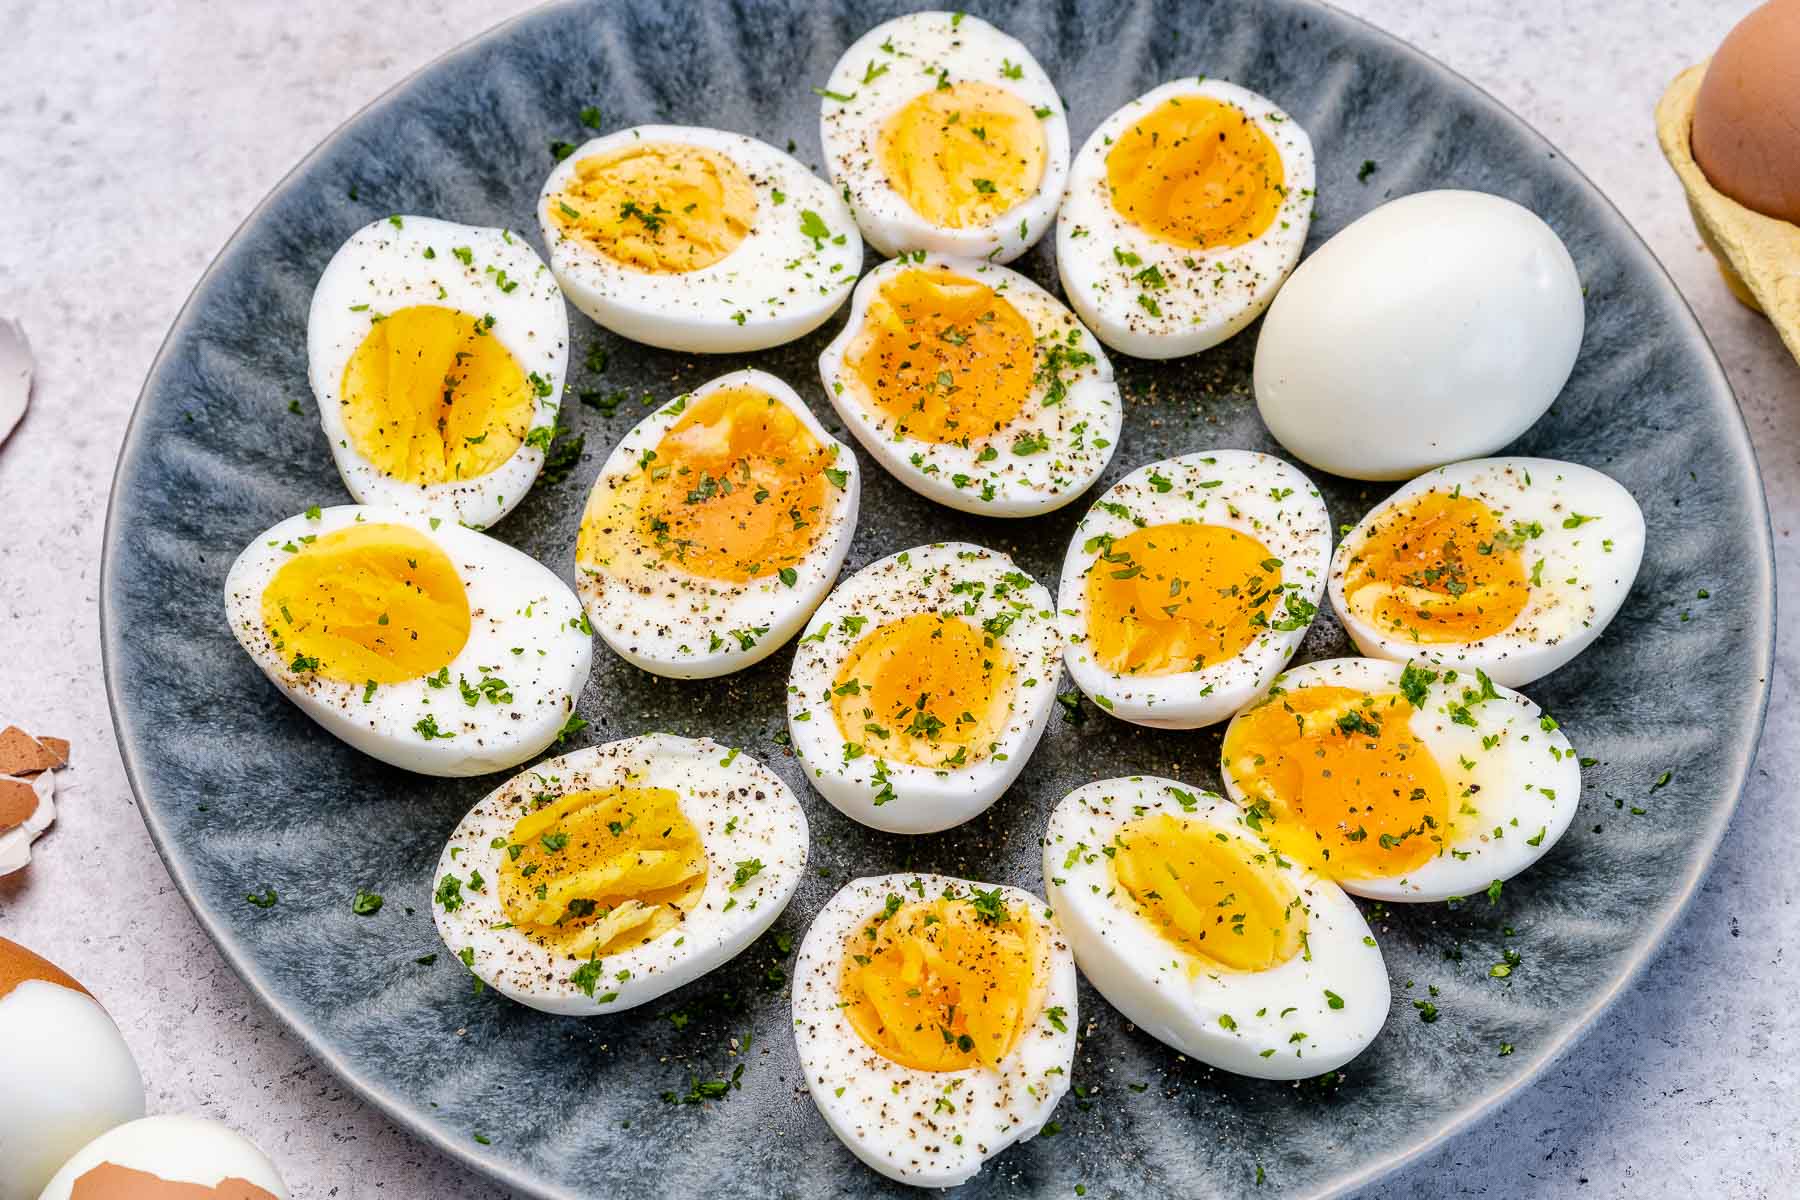 https://cleanfoodcrush.com/wp-content/uploads/2021/03/How-to-Make-Perfectly-Boiled-Eggs-Clean-Eating-Easter-Recipe-CleanFoodCrush.jpg